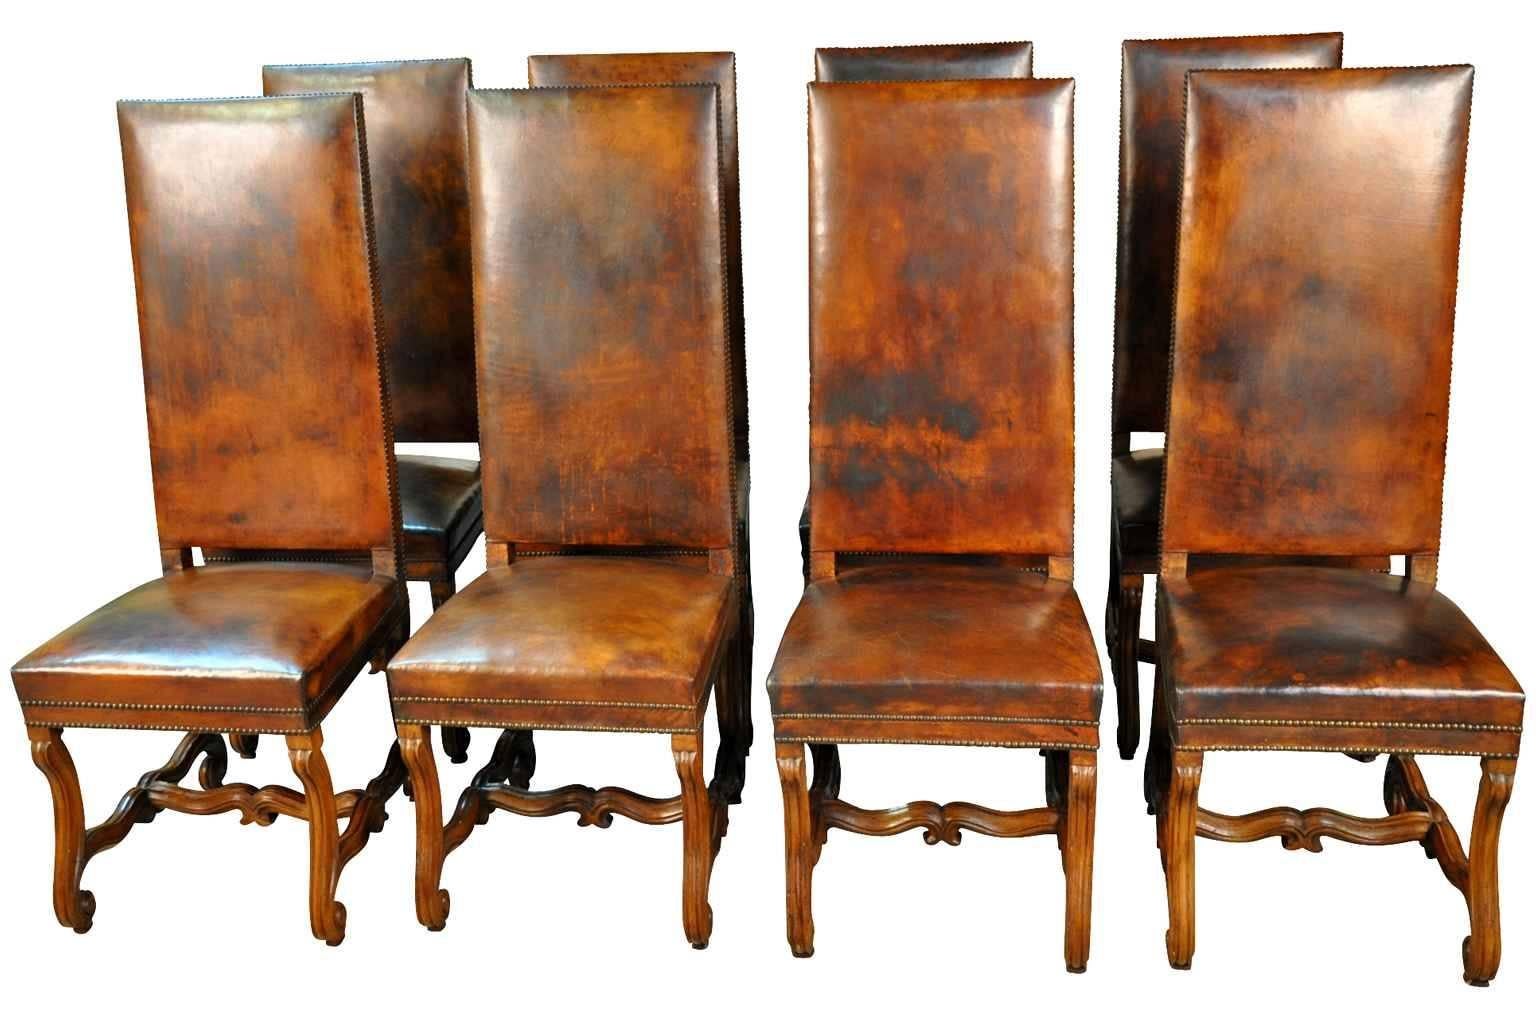 A very handsome set of eight 19th century Louis XIV style dining chairs from the Catalan region of Spain. Wonderfully constructed from walnut and leather - handsome nailhead detailing.